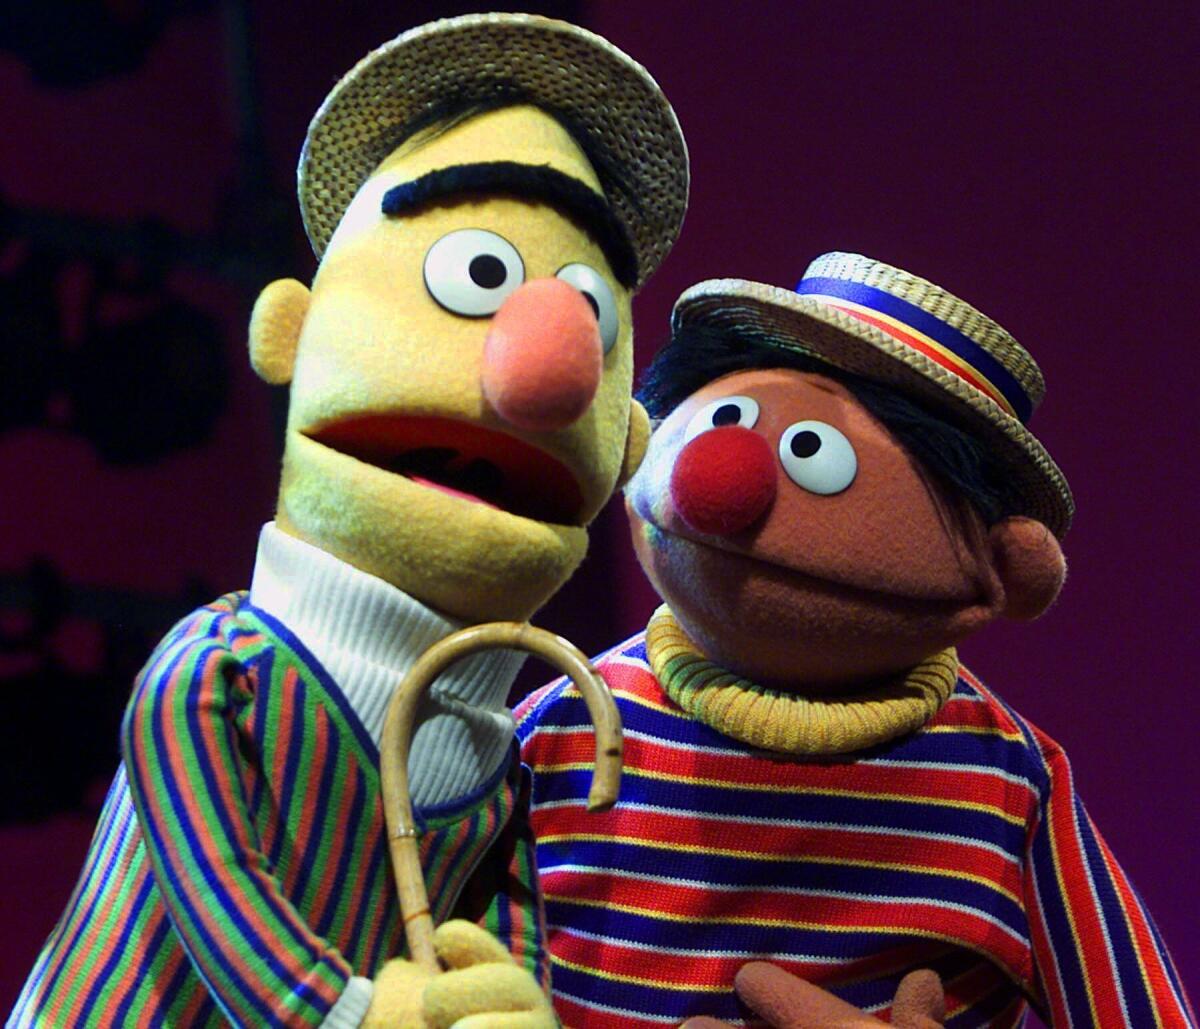 Bert and Ernie are the most famous roommates on "Sesame Street." But could they finally be revealed as something more?